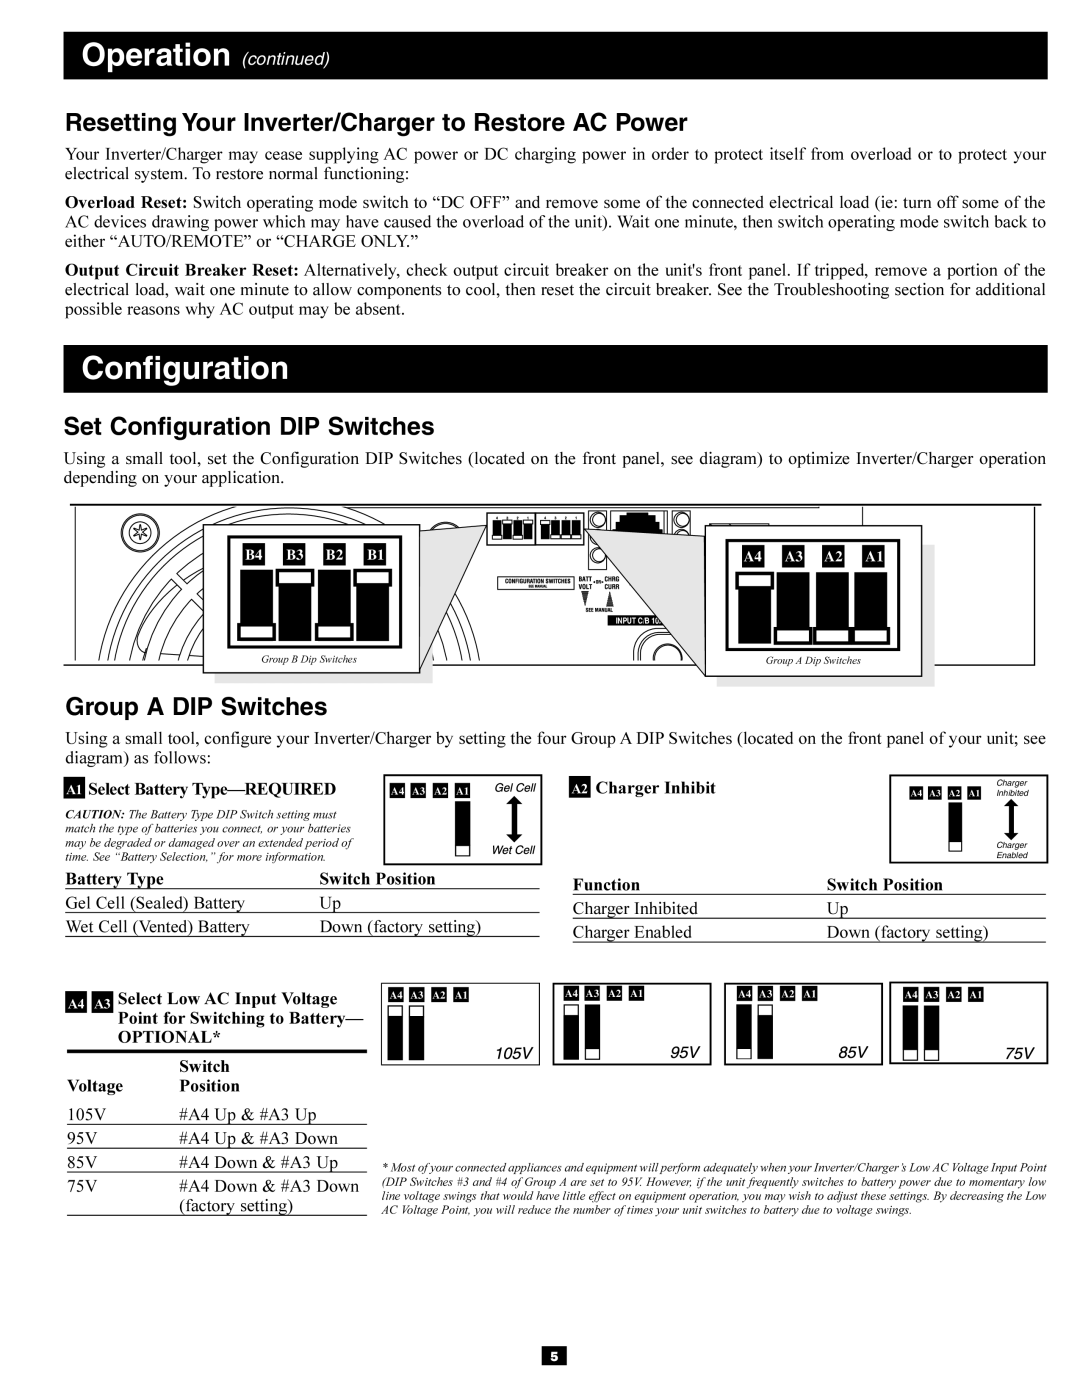 Tripp Lite APSRM4 owner manual Resetting Your Inverter/Charger to Restore AC Power, Set Configuration DIP Switches 